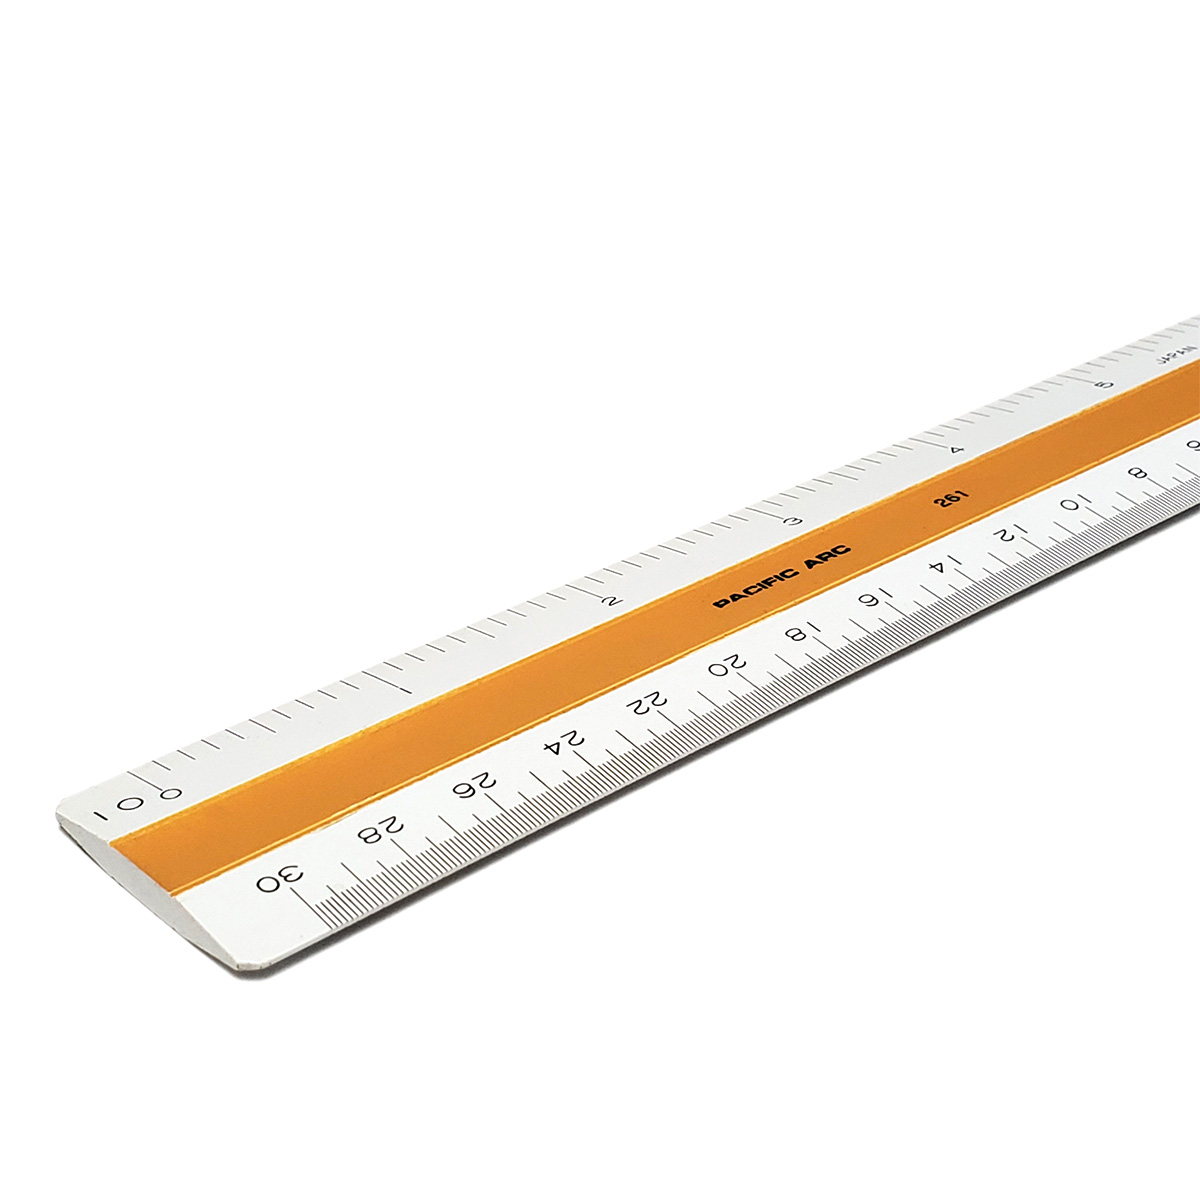 Pacific Arc Engineering & Architect Scaling Ruler, stainless steel